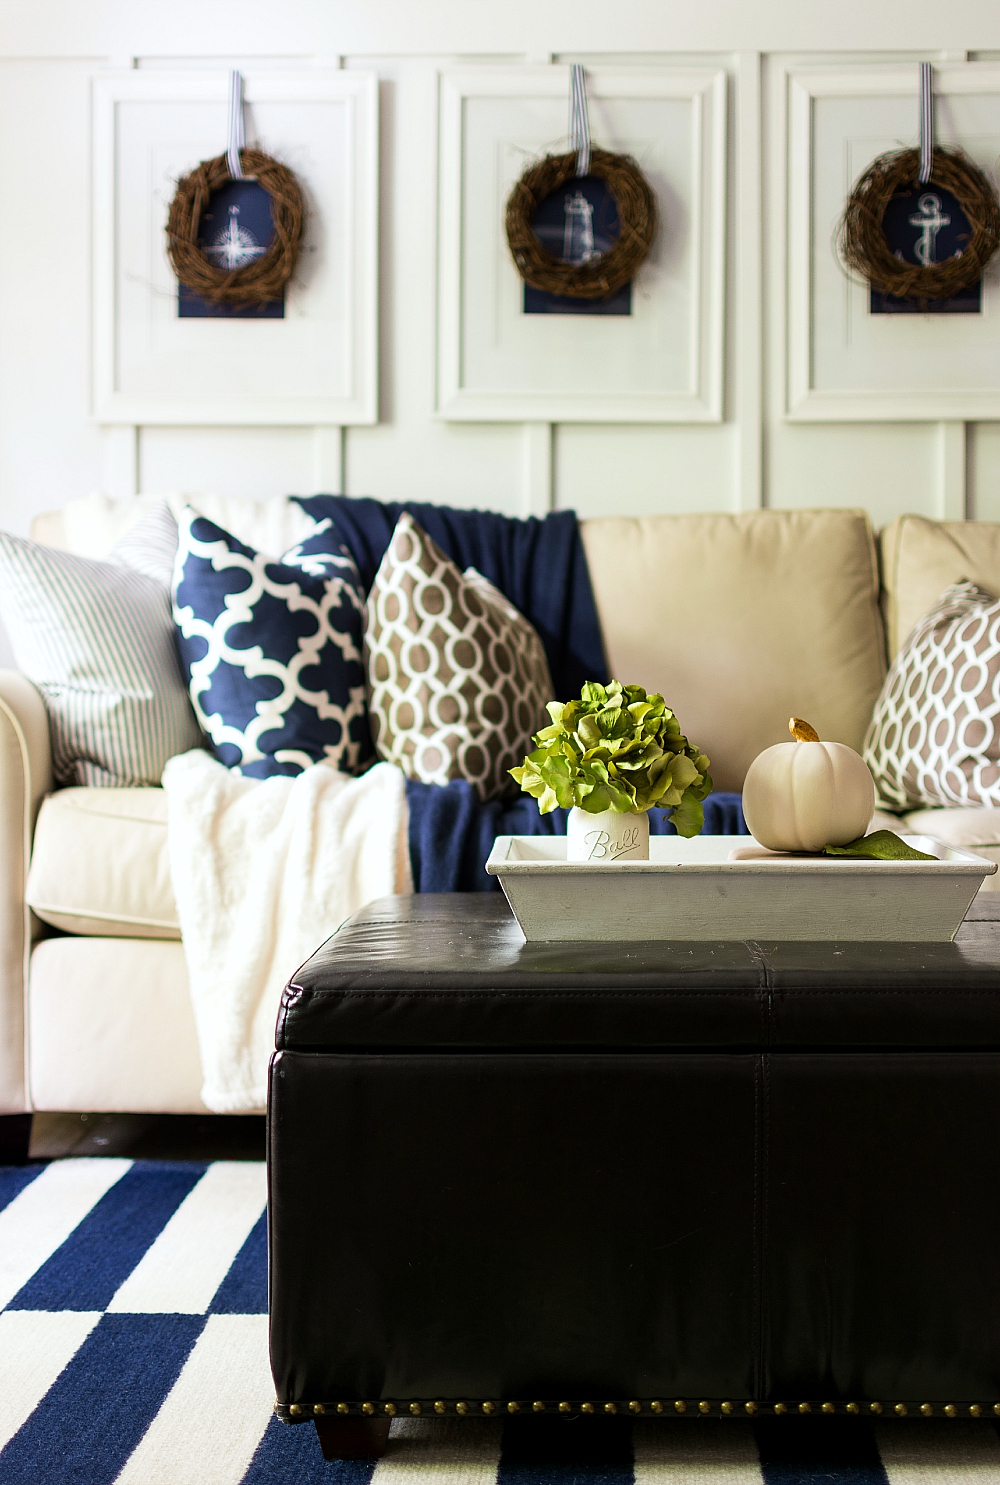 Fall Decorating Using Navy and Brown and White: Board and Batten Living Room Decorated for Fall